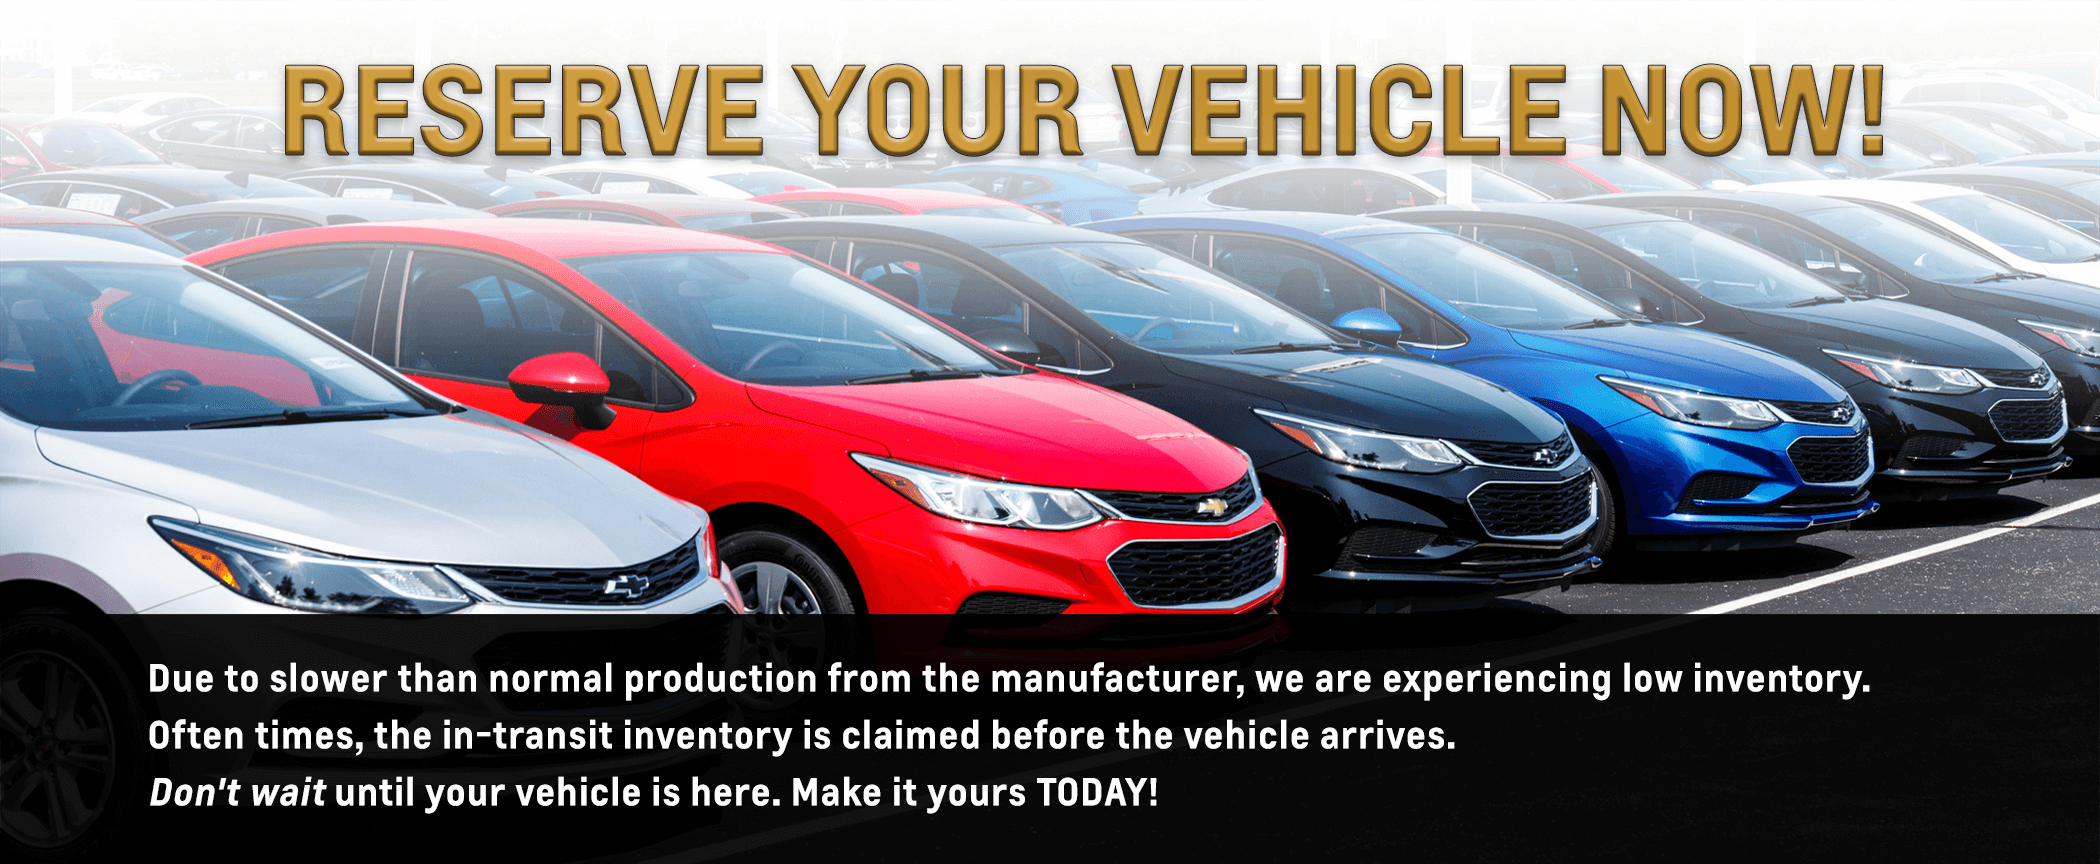 Reserve Your Vehicles NOW!